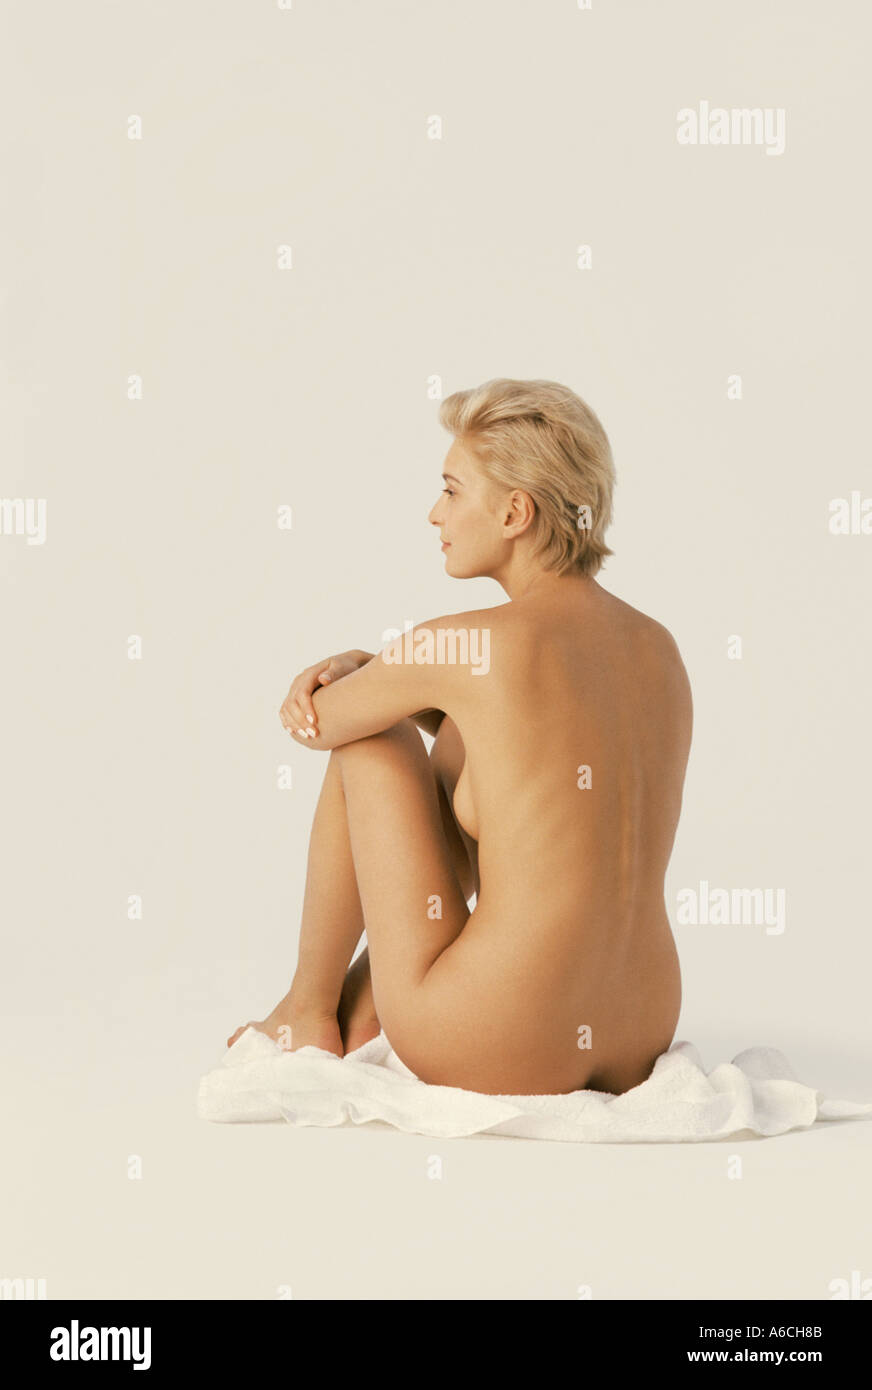 Side view of blond nude blond woman with short hair seated on white towel  on floor in studio Stock Photo - Alamy